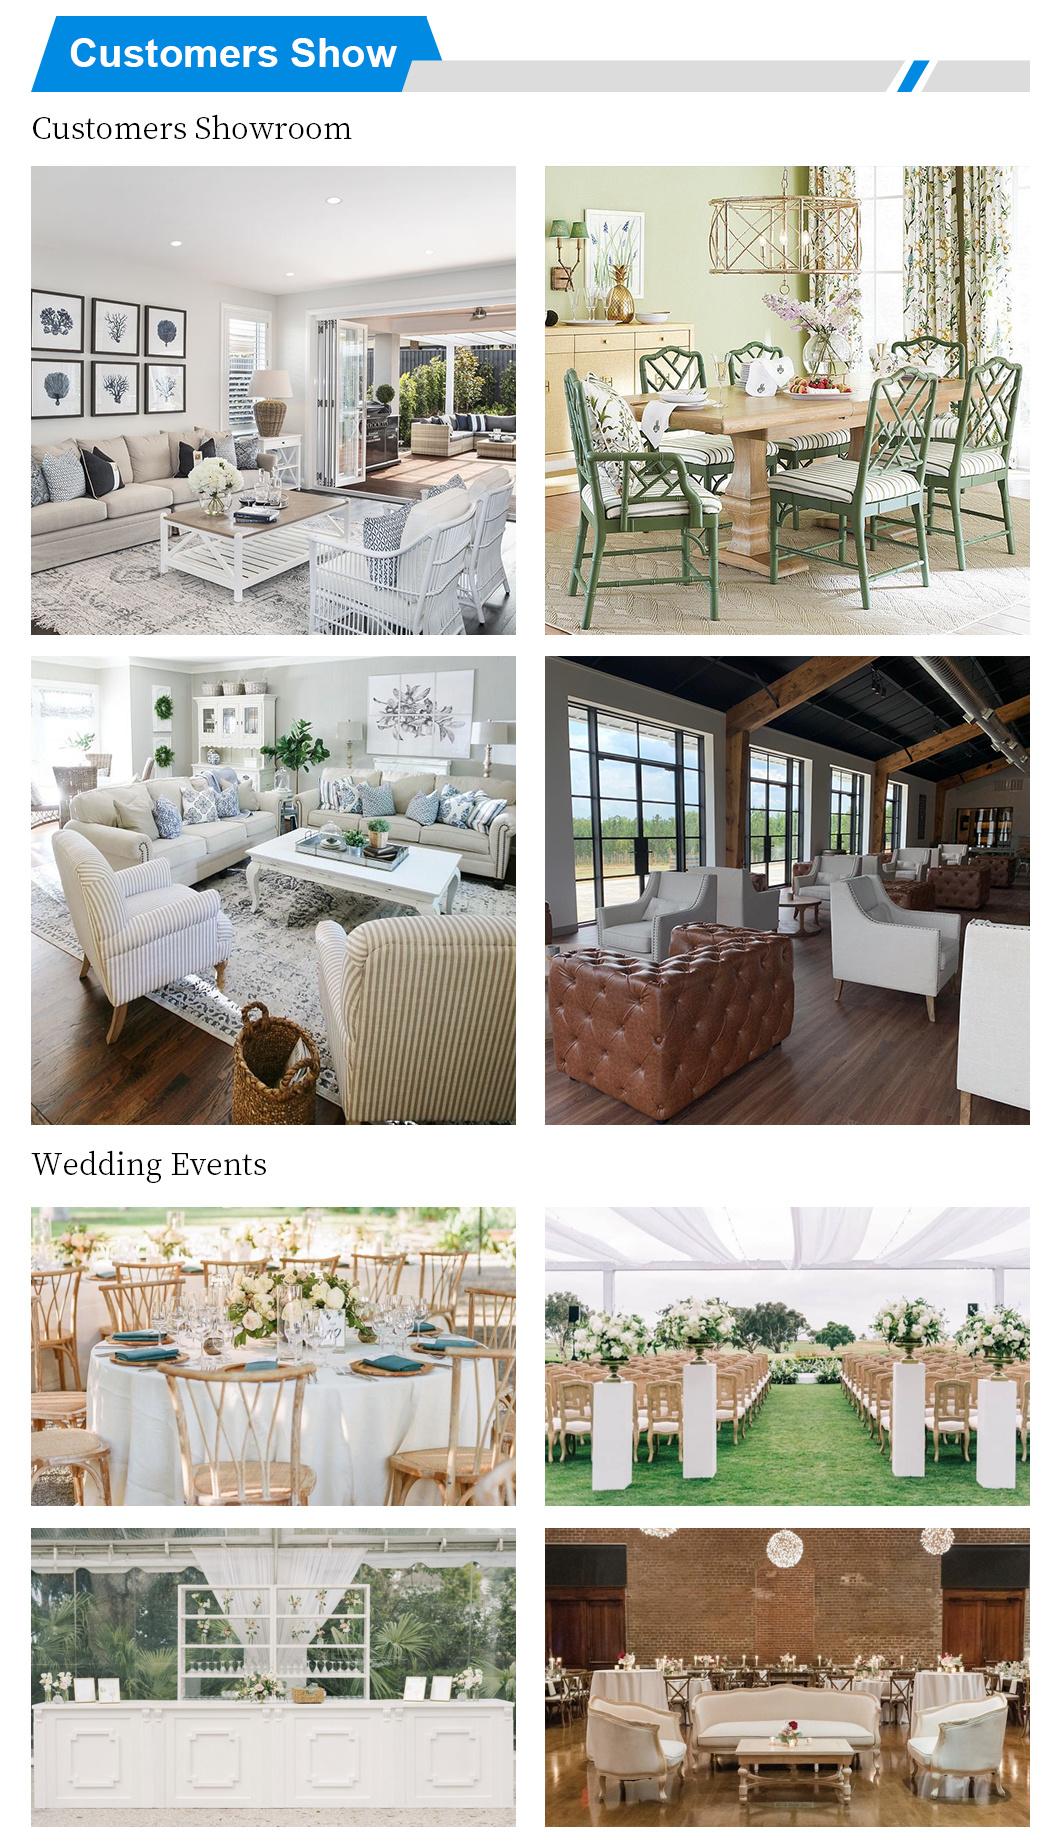 Hotel Living Room Furniture Wedding Restaurant Chair Dining Chairs